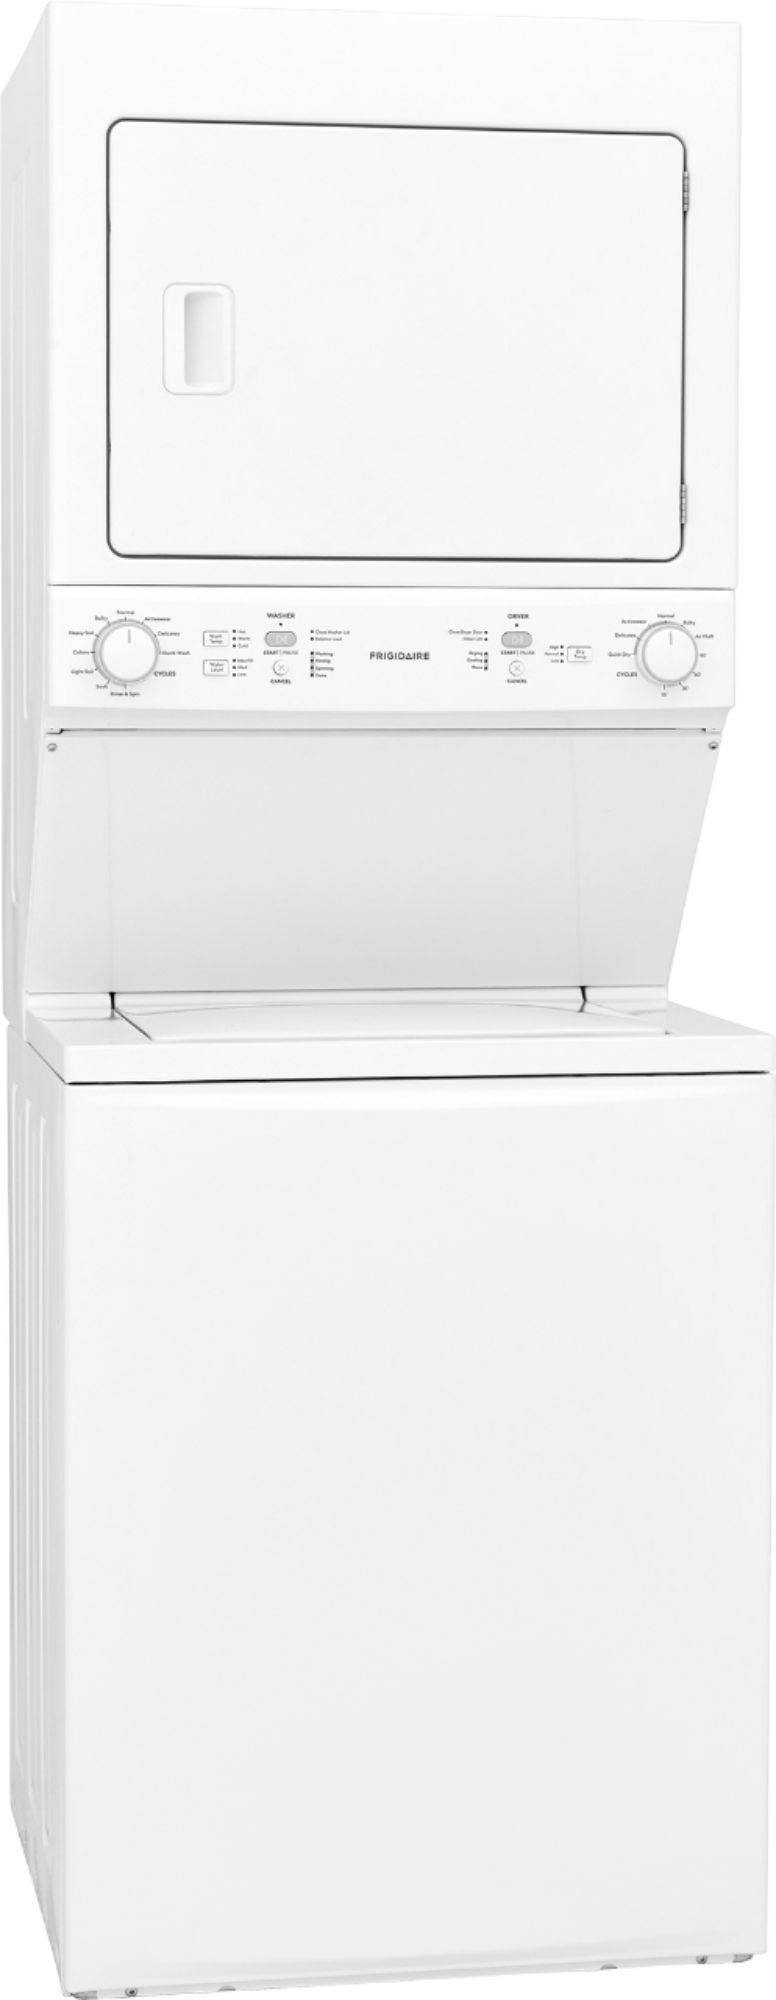 Angle View: Frigidaire - 3.9 Cu. Ft. Top Load Washer and 5.5 Cu. Ft. Electric Dryer Laundry Center - White